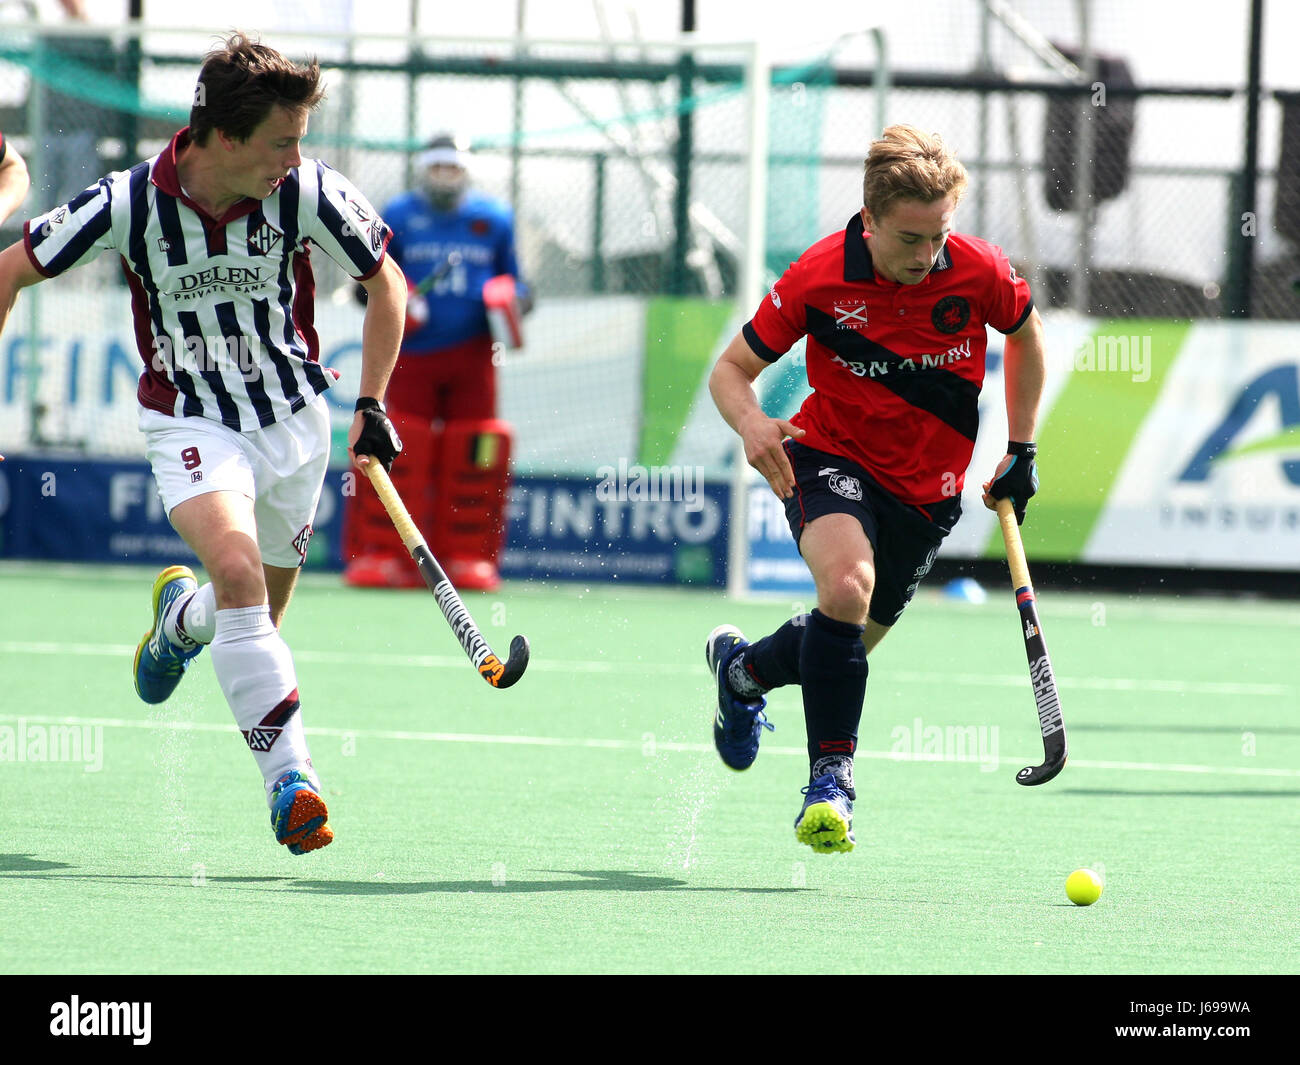 Leuven, Belgium. 20th May, 2017. Hockey Play-off final half Herakles Vs.Dragons Luyten Thimothy in game actions. Credit: Leo Cavallo/Alamy Live News Stock Photo